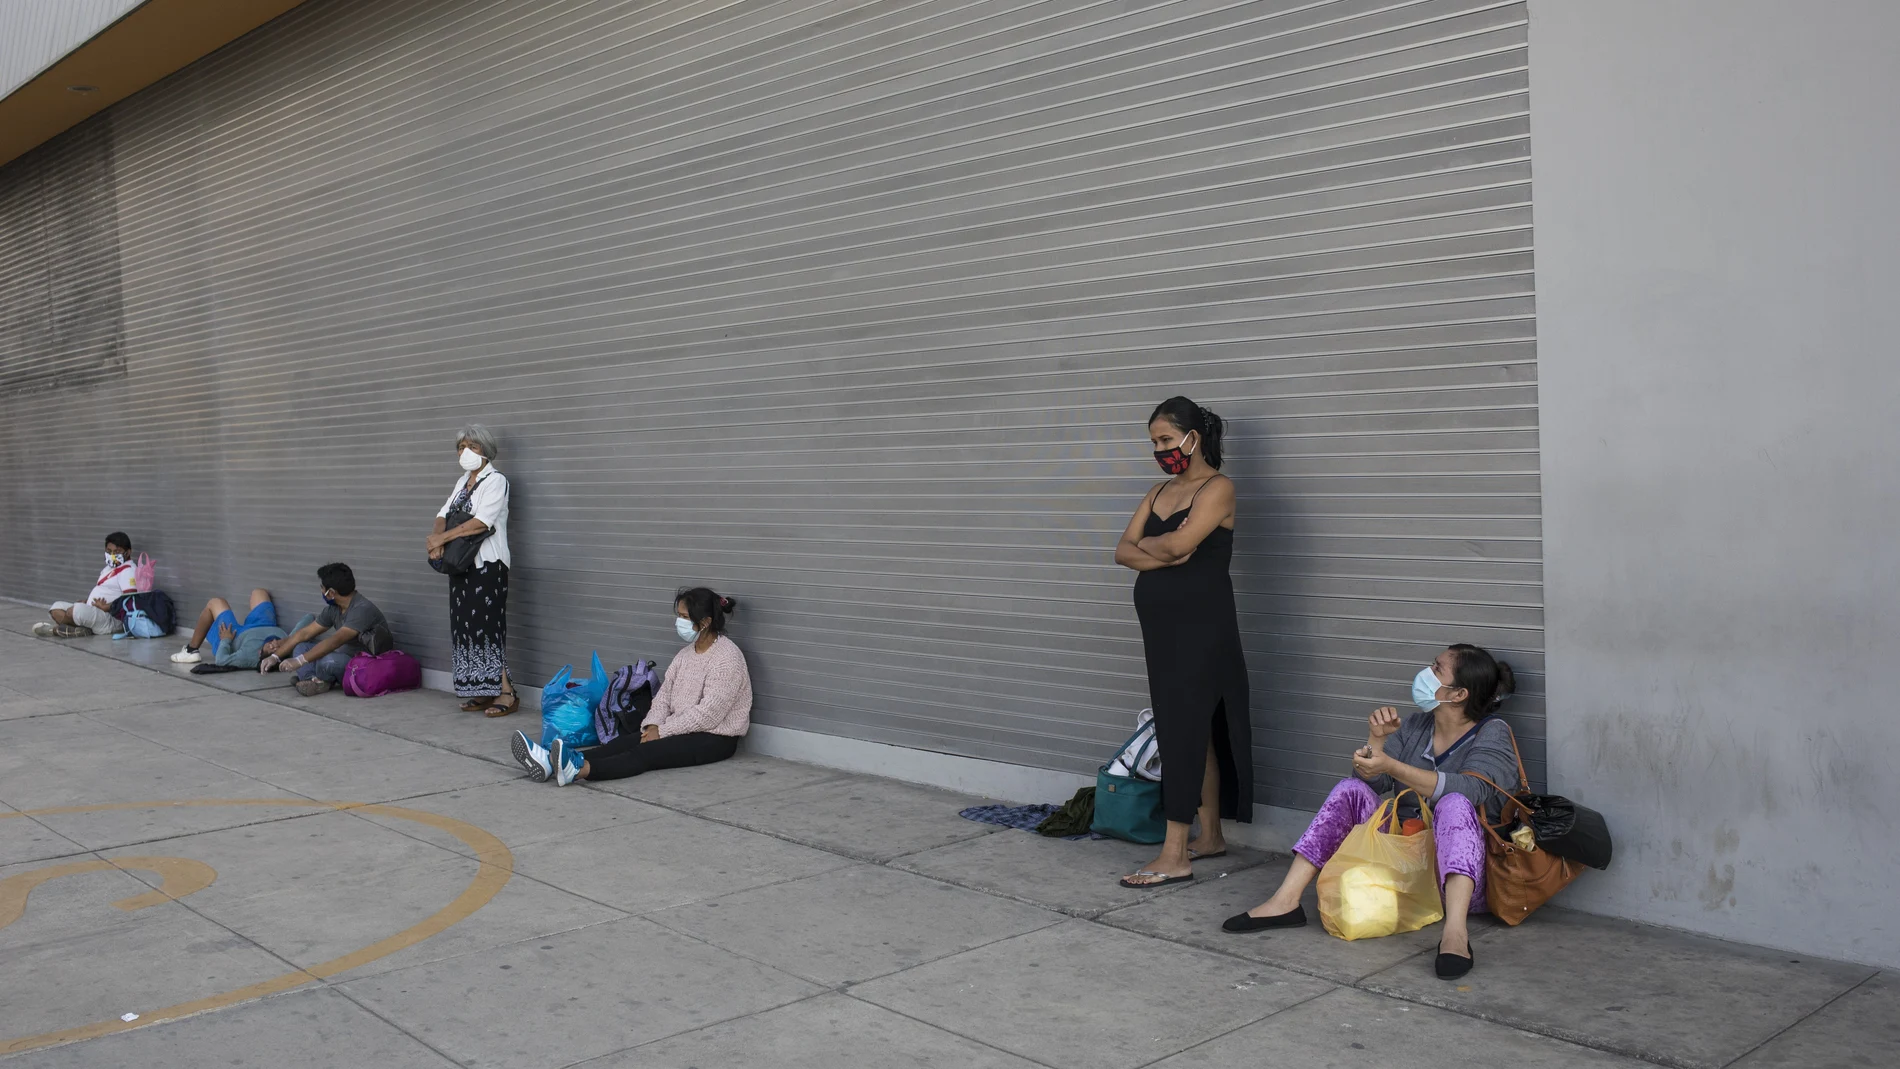 Wearing masks against the spread of the new coronavirus, people wait outside a public hospital, in Lima, Peru, Tuesday, May 12, 2020. The line of those waiting is of both patients and relatives of patients. (AP Photo/Rodrigo Abd)